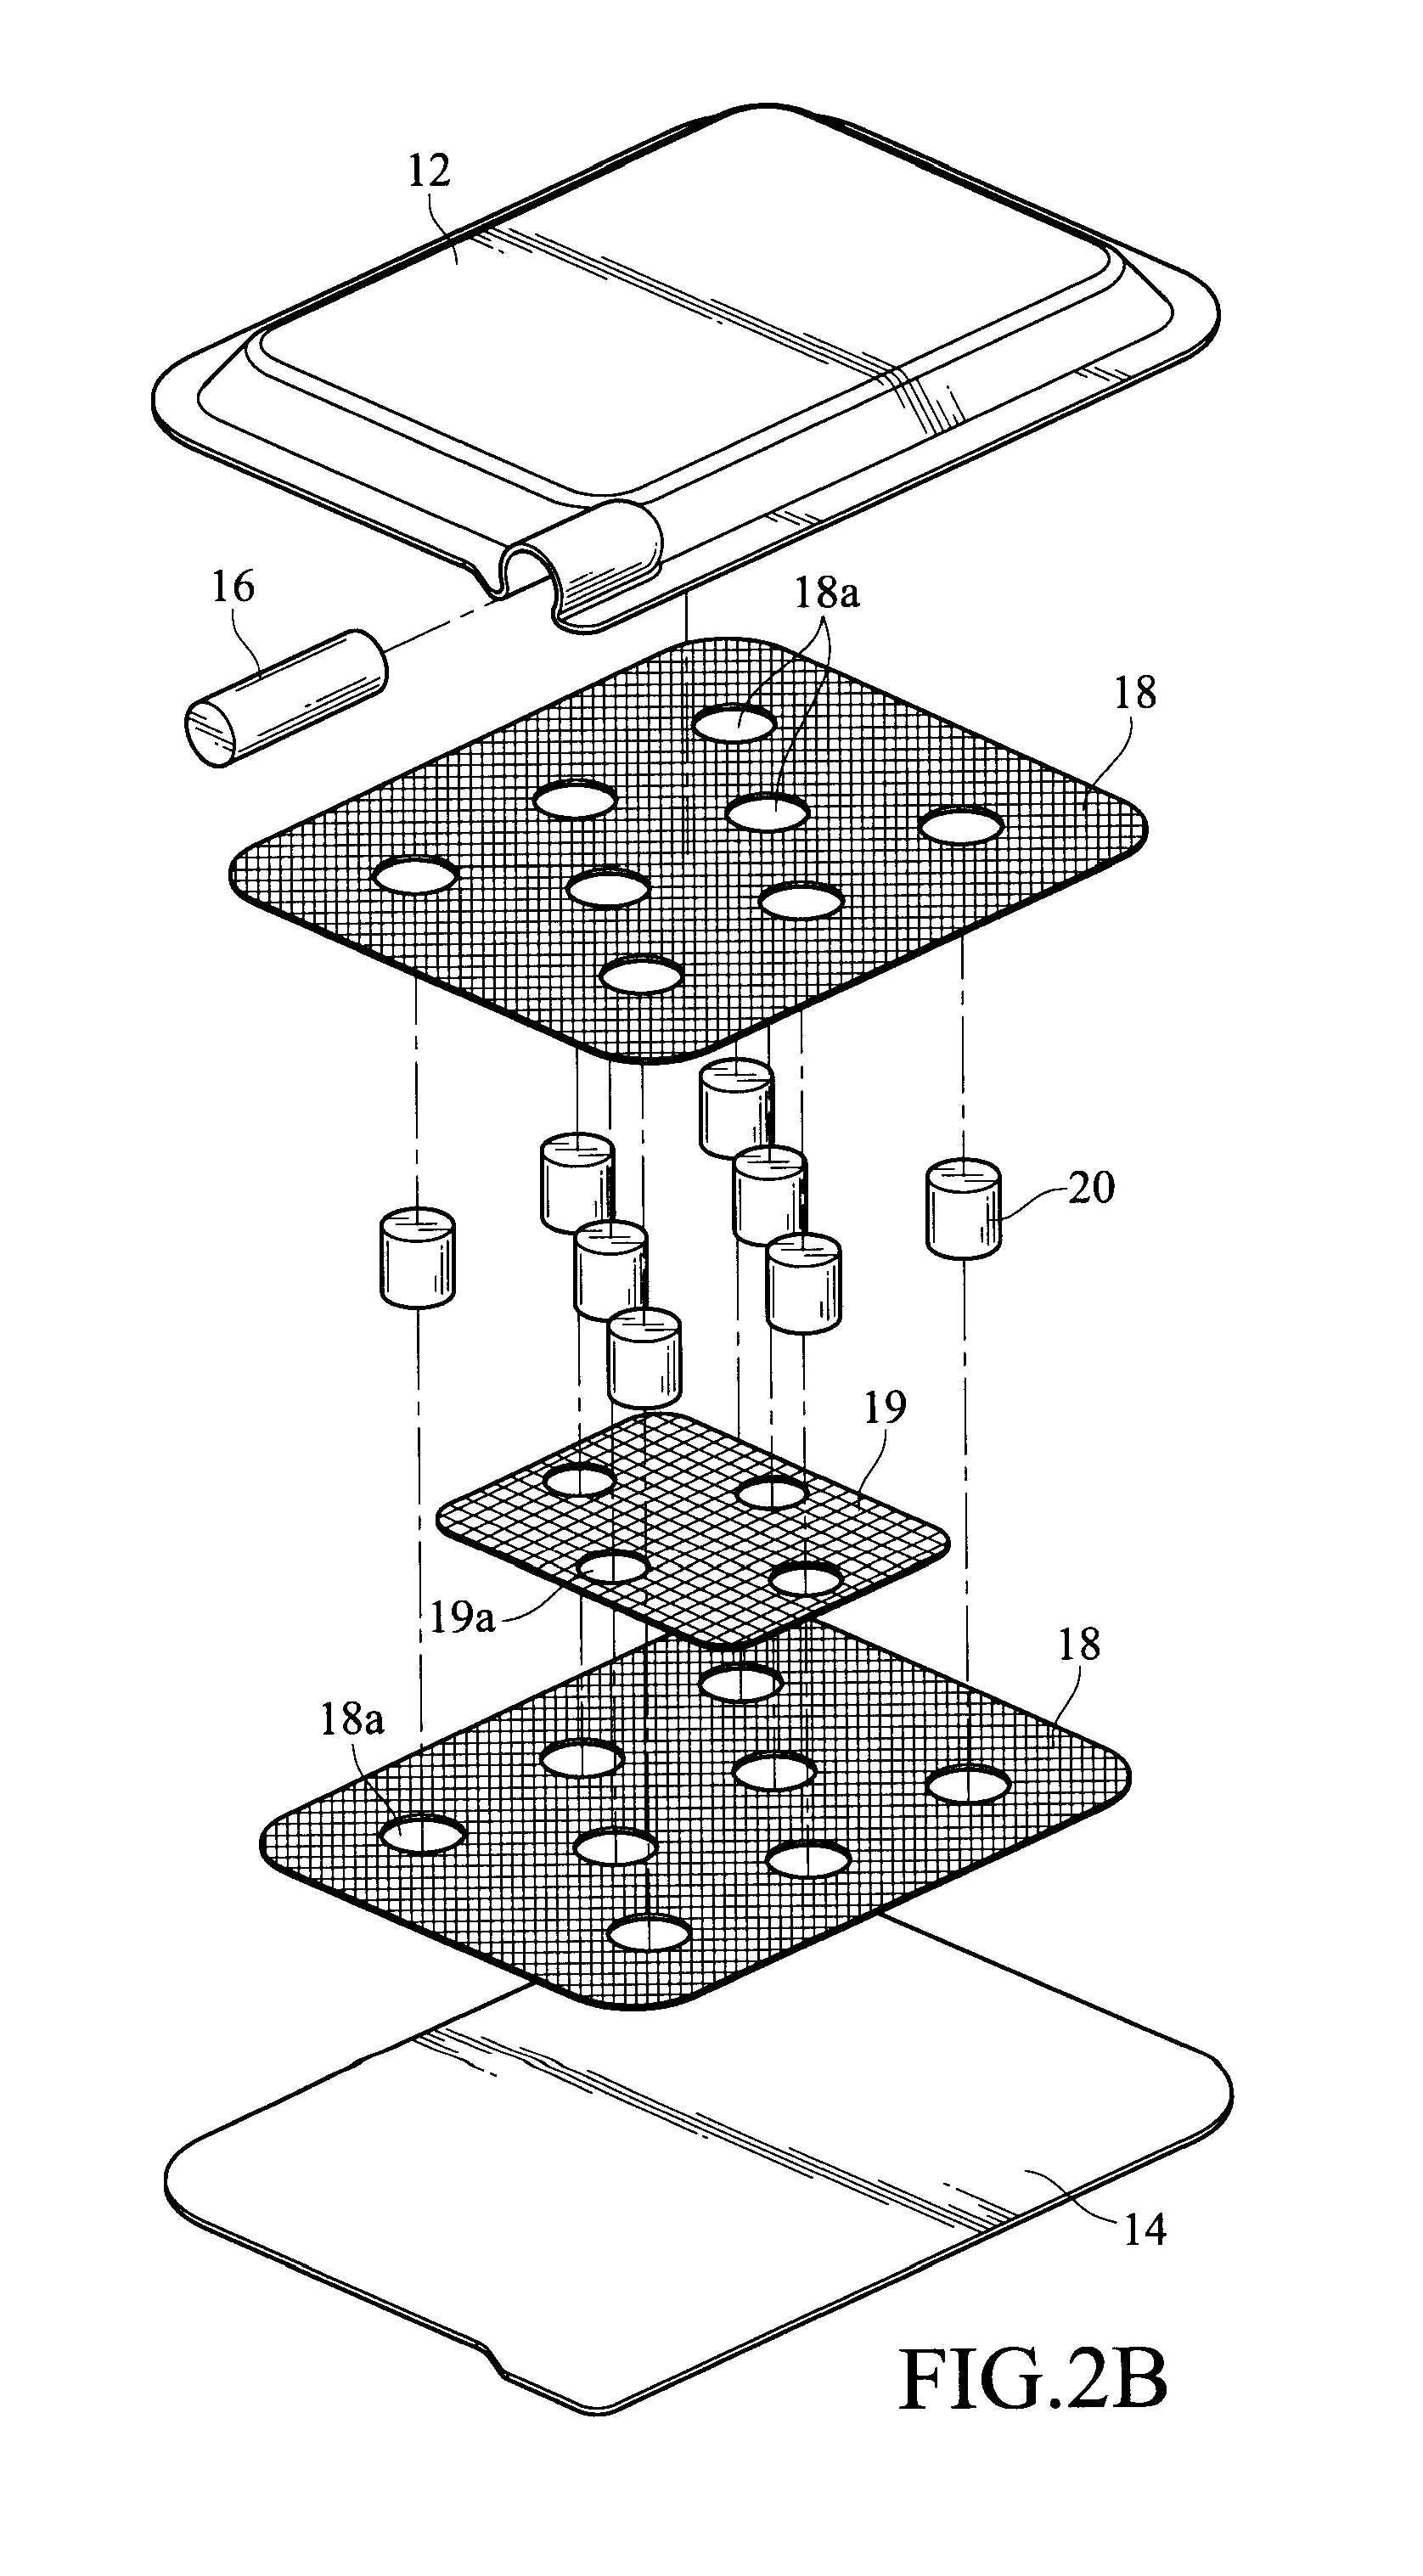 Heat spreader with composite micro-structure